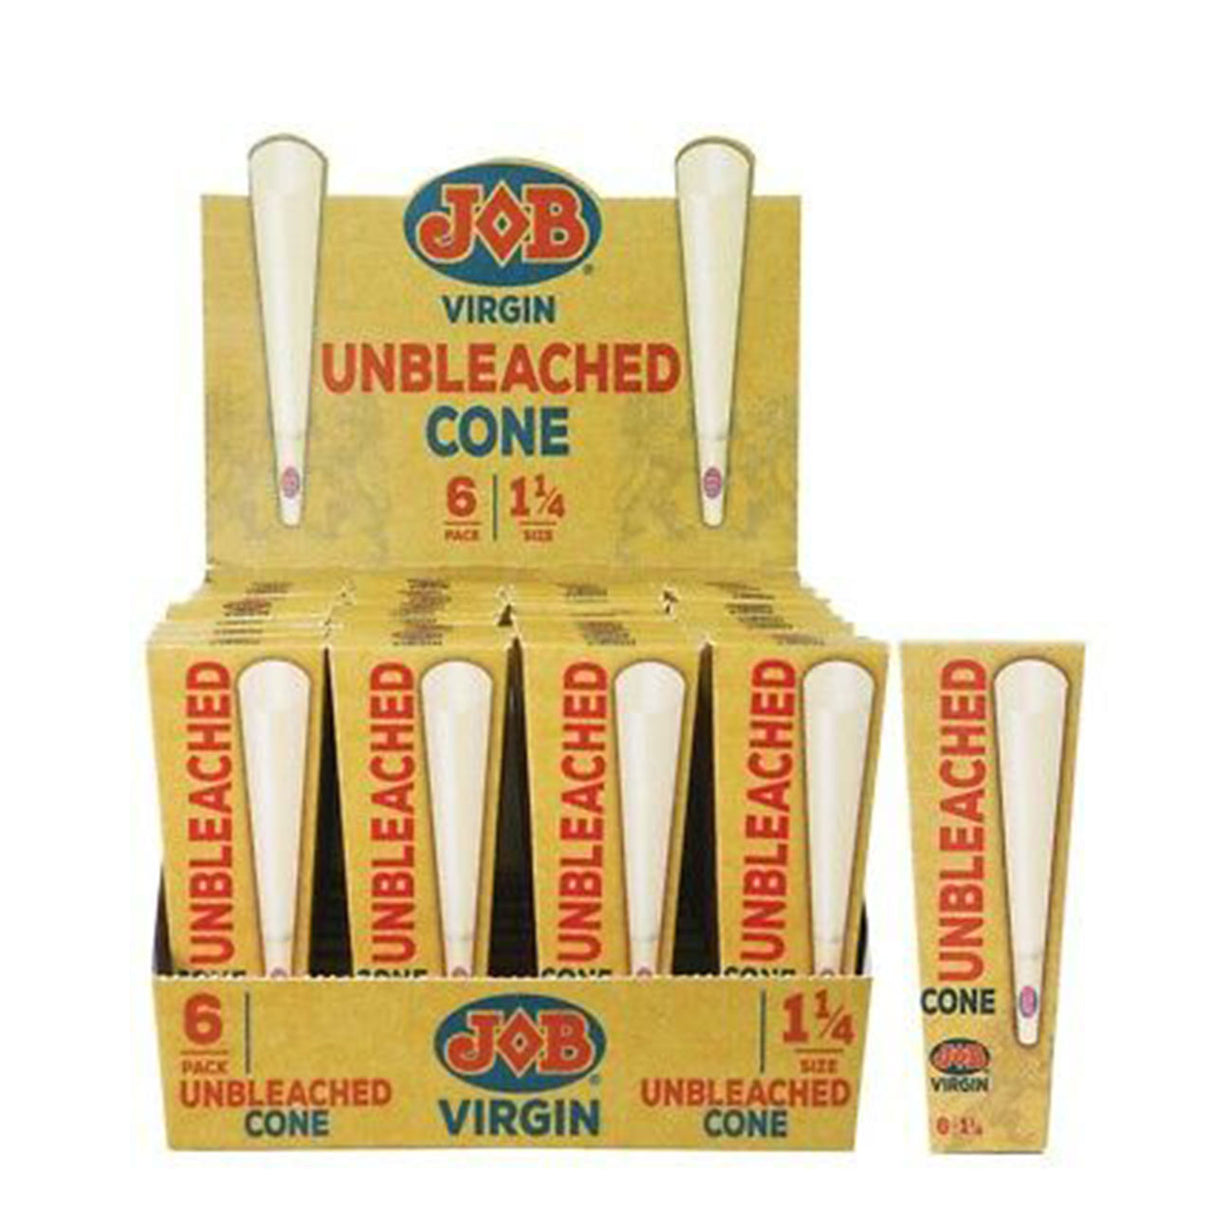 Job Virgin Unbleached Pre-Rolled Cones 6  Pack 1 1/4" Box Containing 32 6-packs